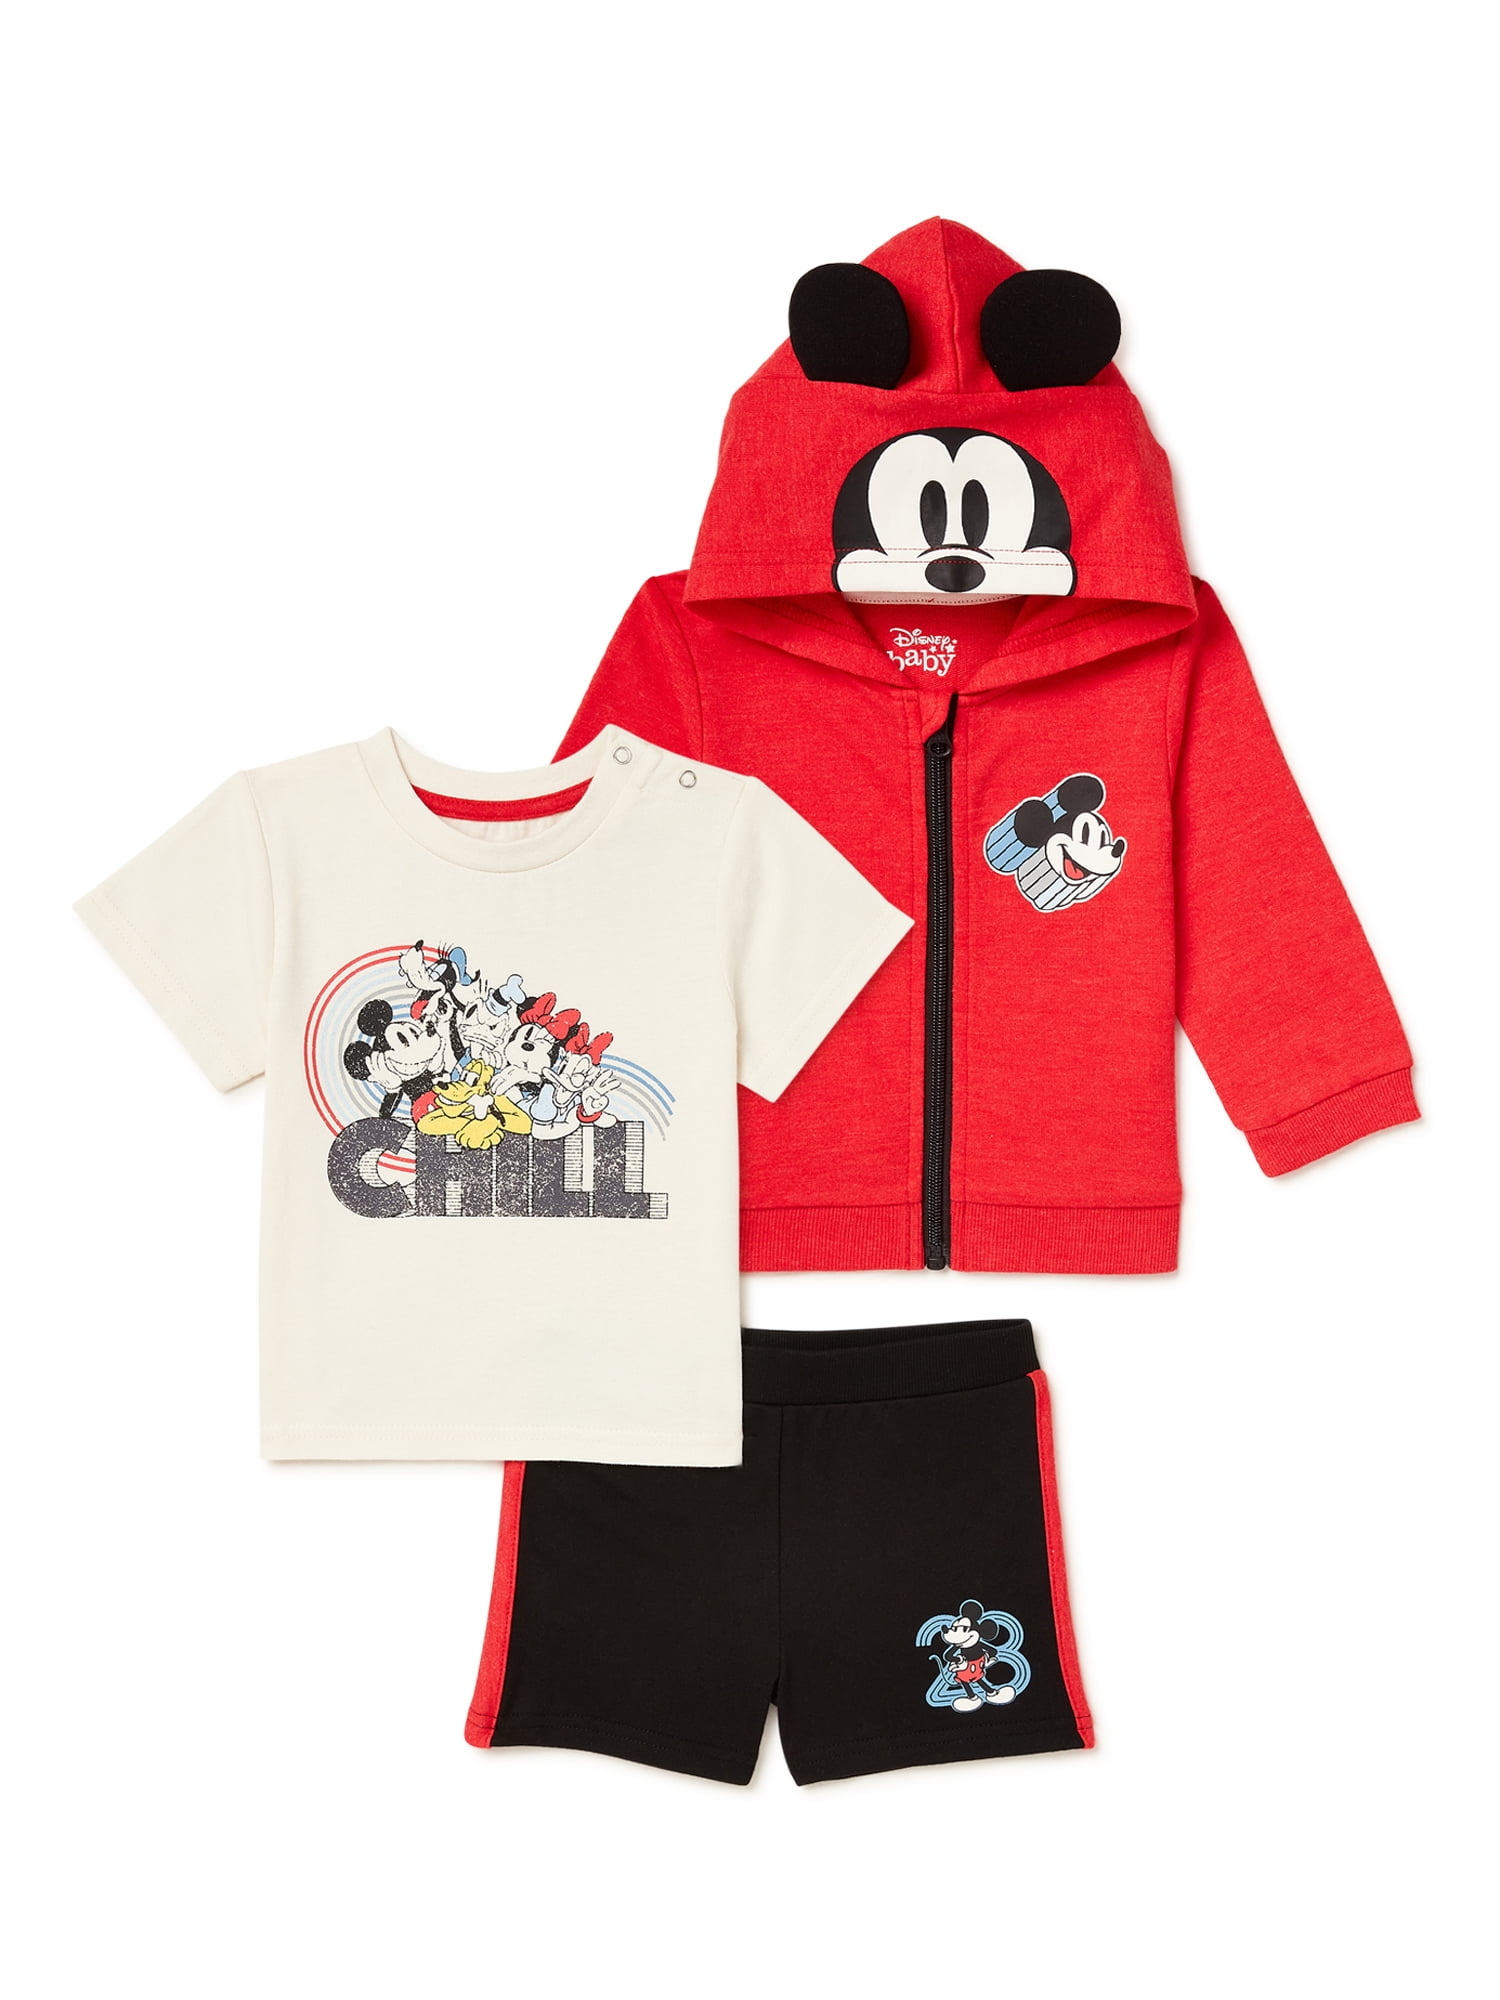 Baby Boy 3pcs Tracksuit Set,Sweatshirt+Hoodie+Pant for Toddler Sweatsuit Outfit 